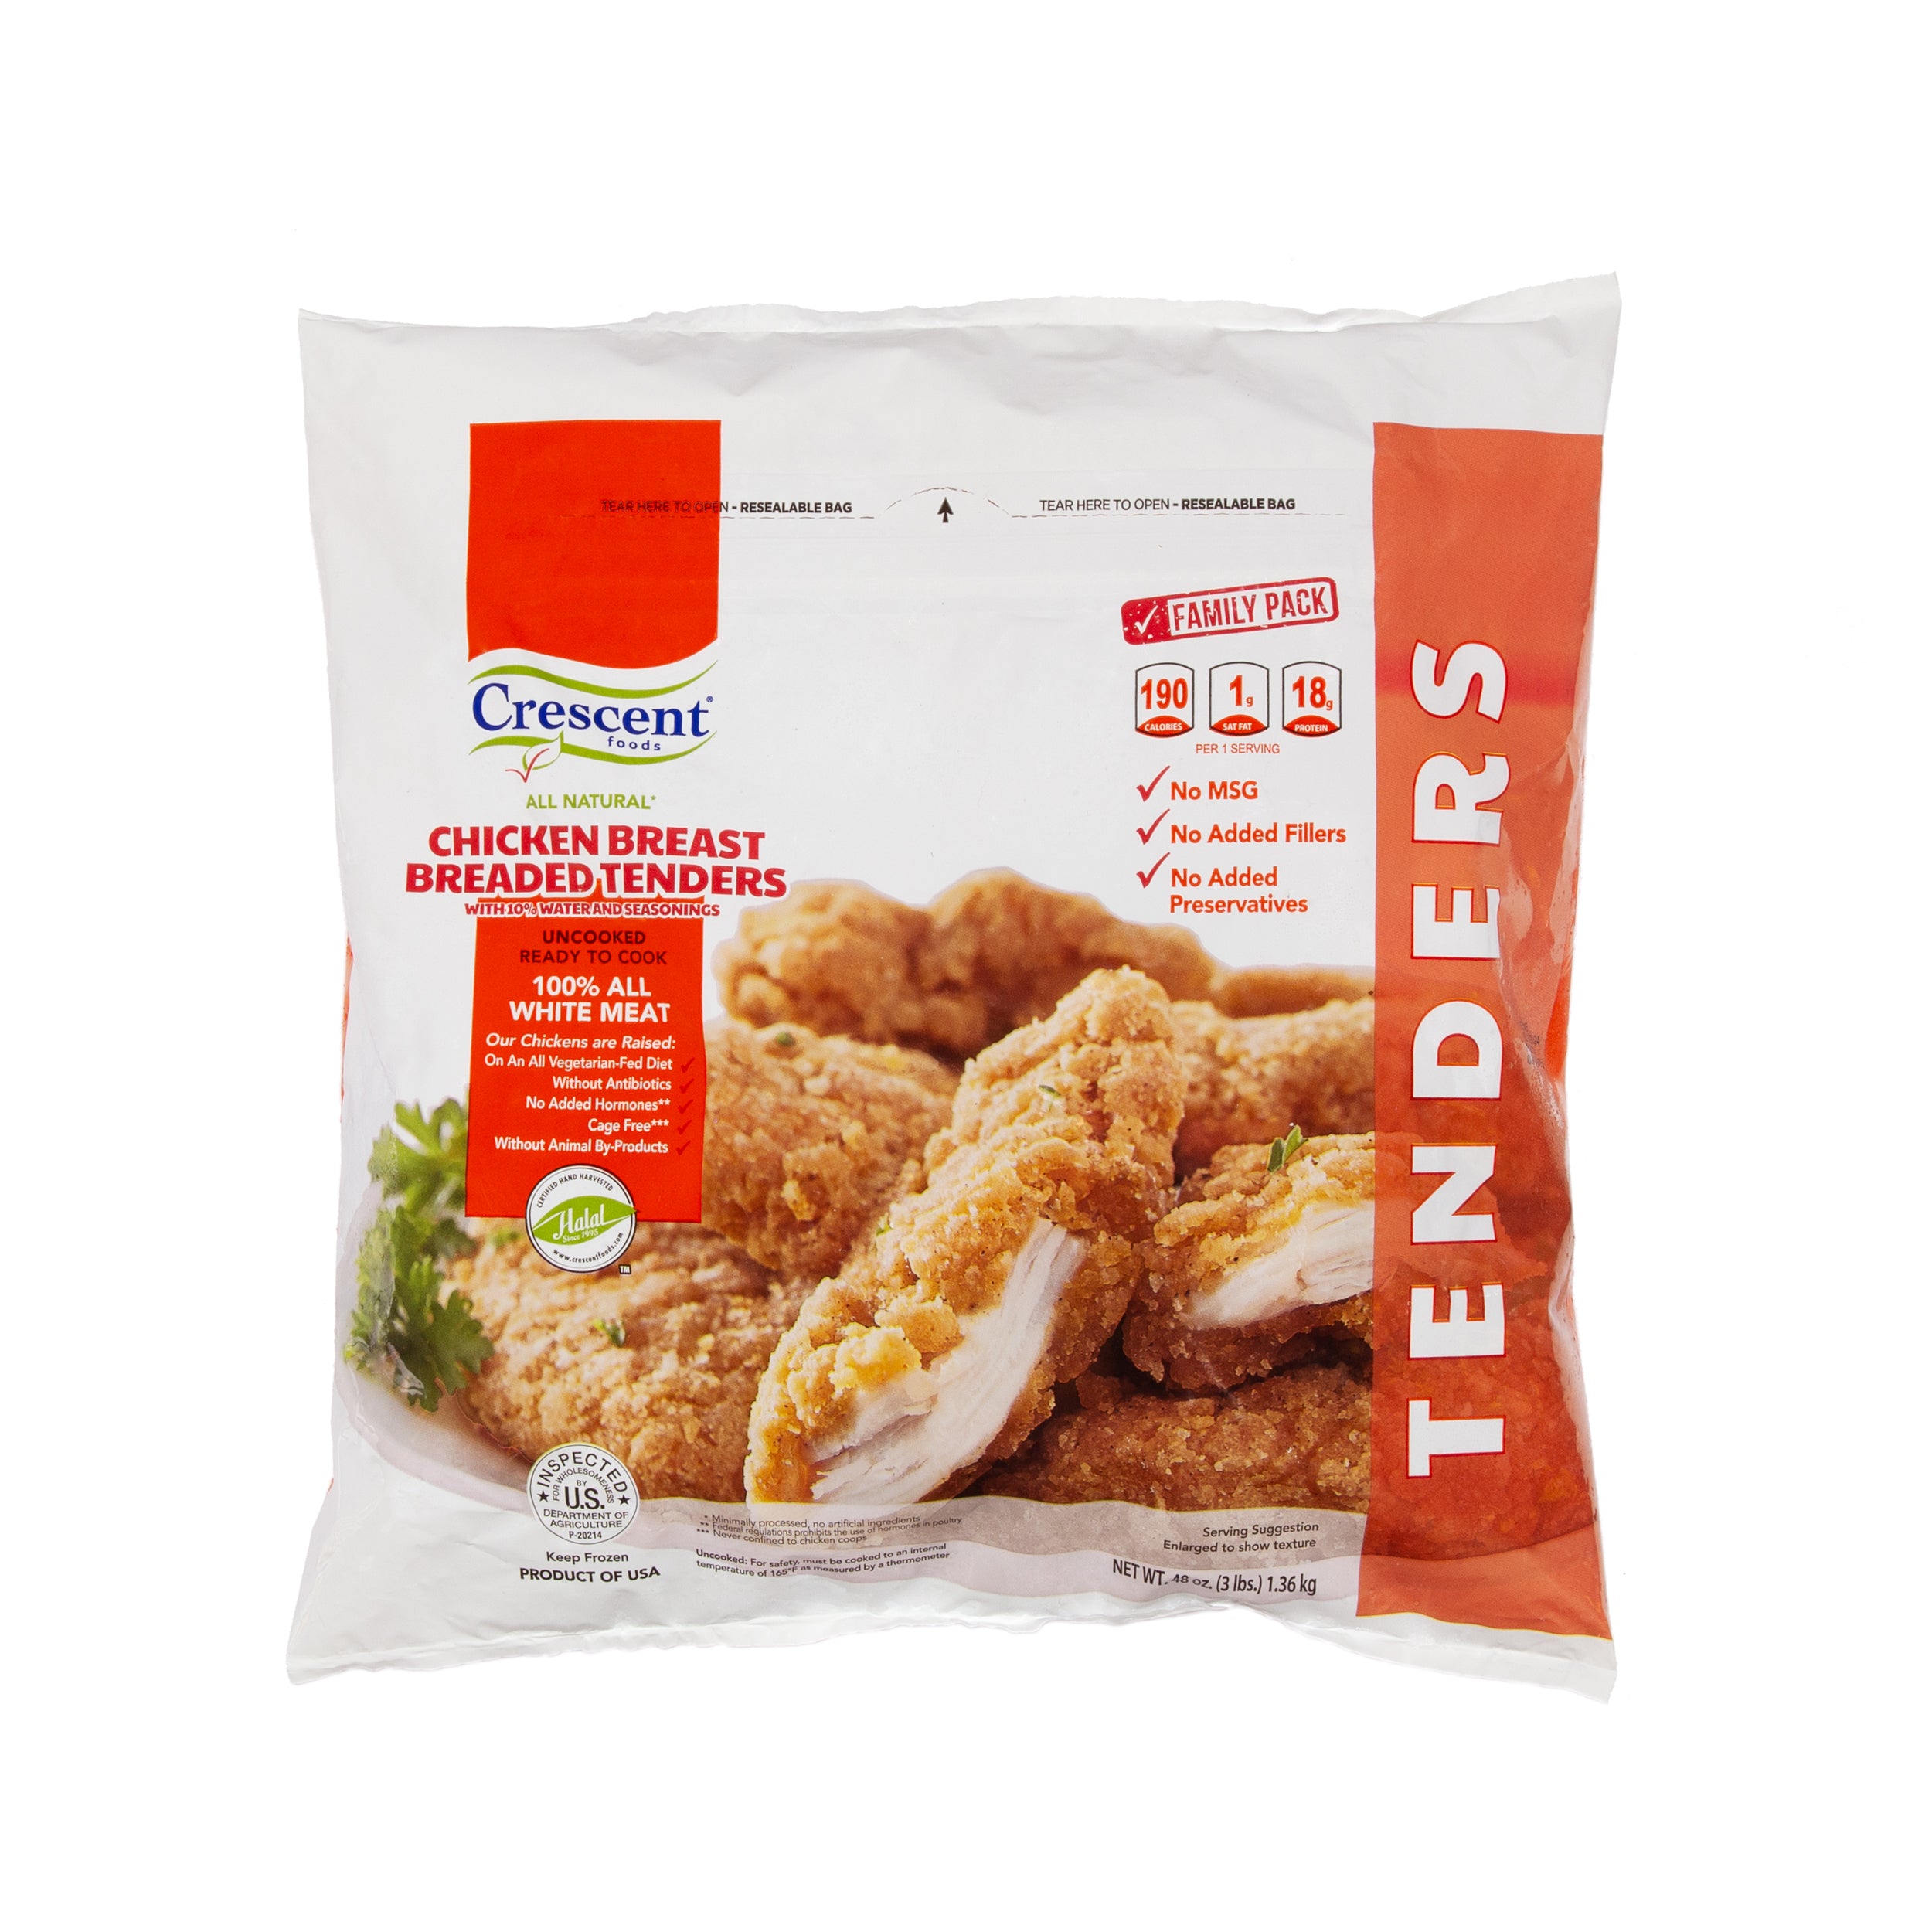 24 Pound Case - All Natural Halal Hand-Cut Chicken Breast Breaded Tenders Case, Ready To Cook